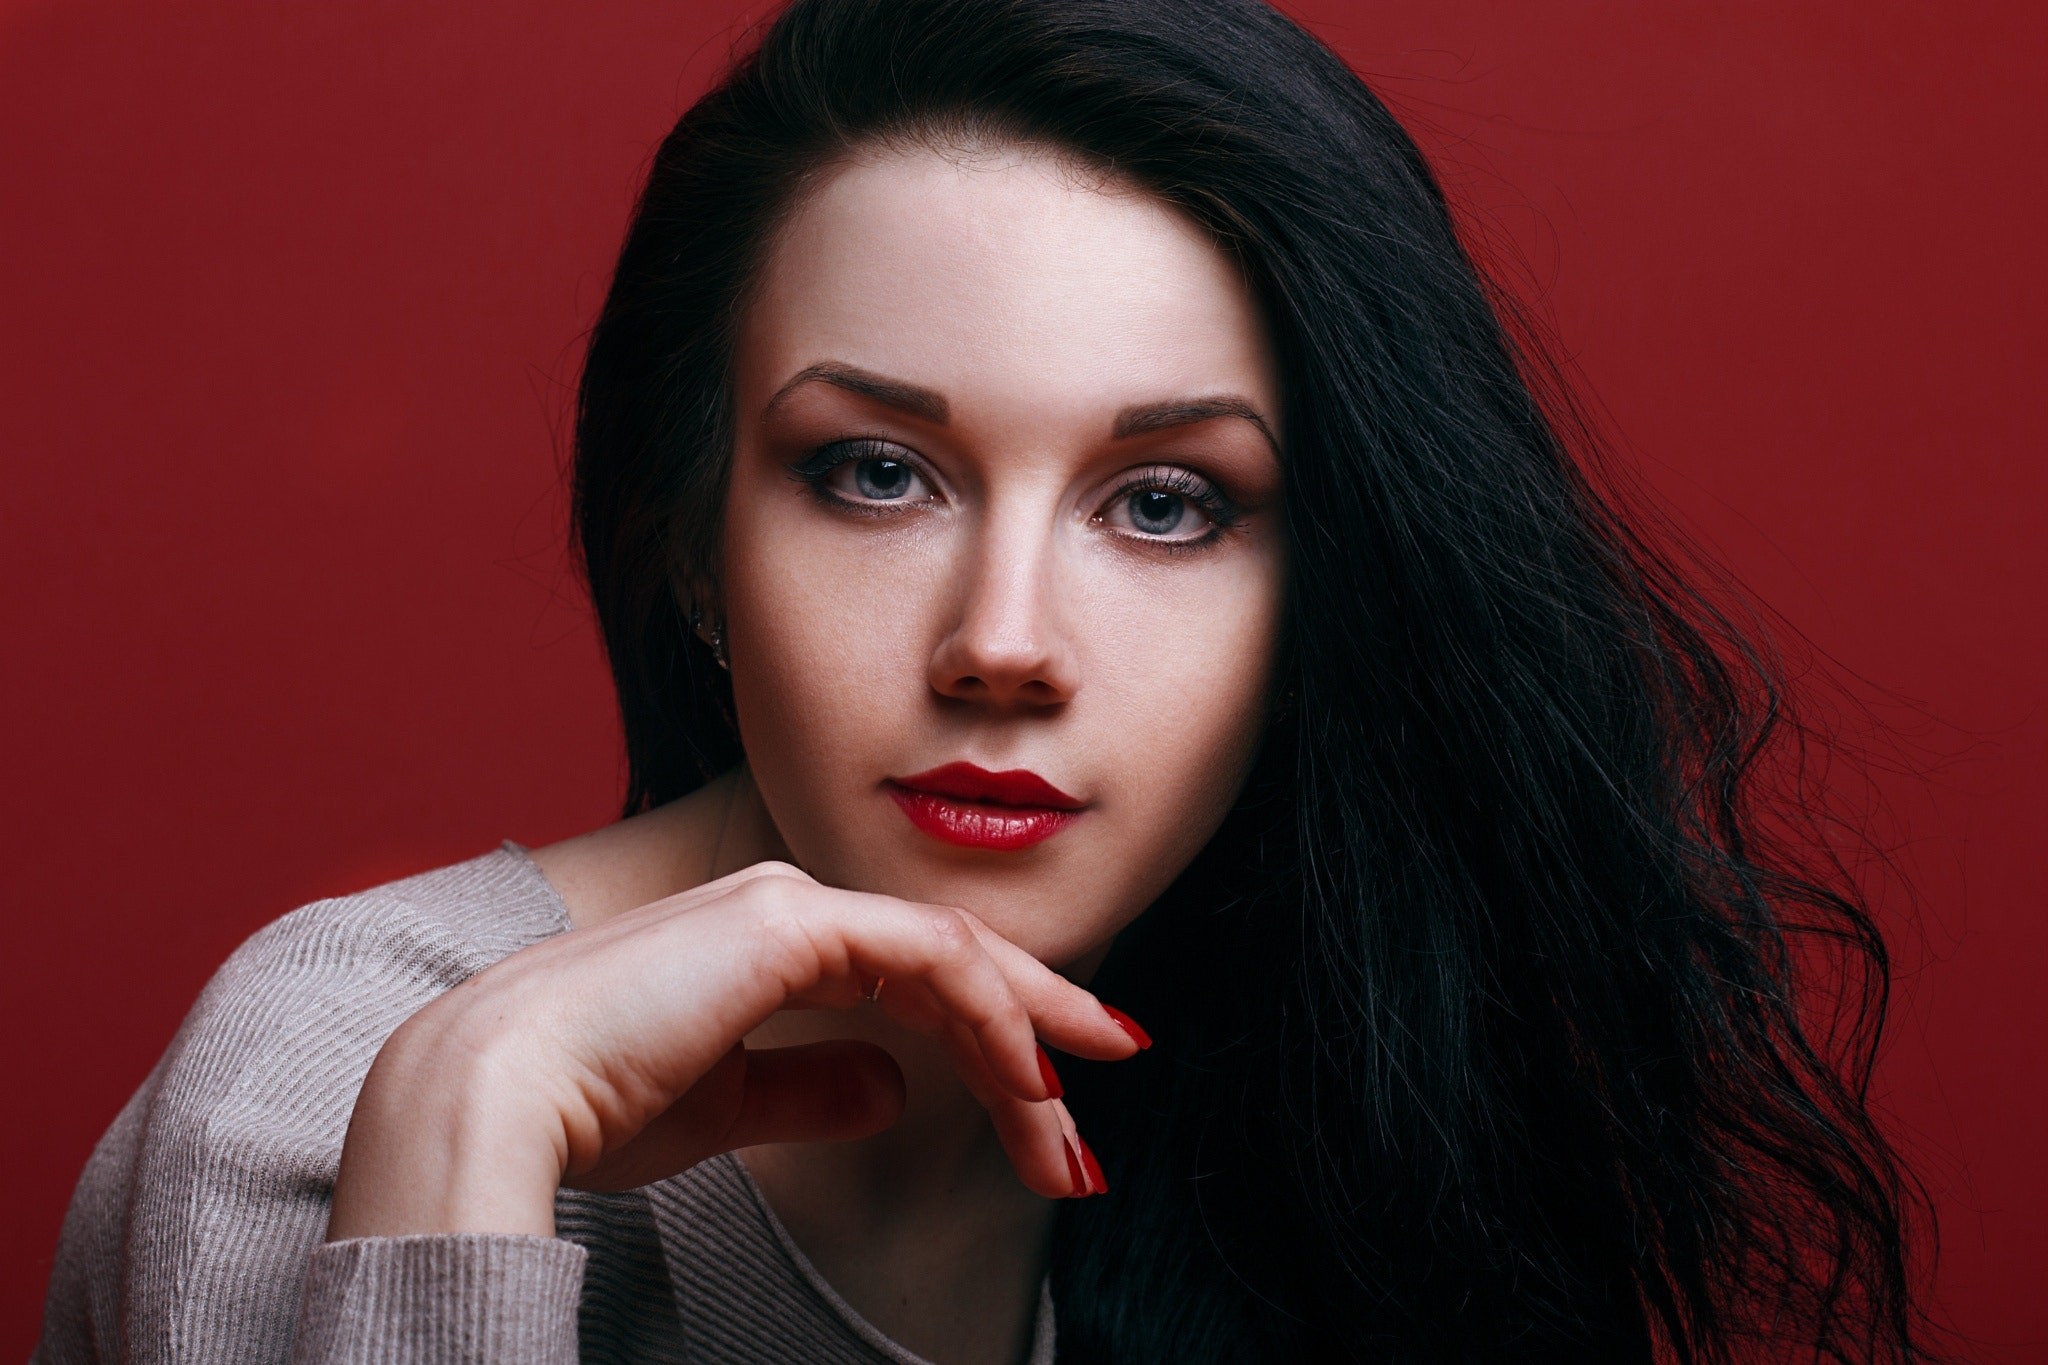 People 2048x1365 women portrait simple background red nails face black hair blue eyes red lipstick